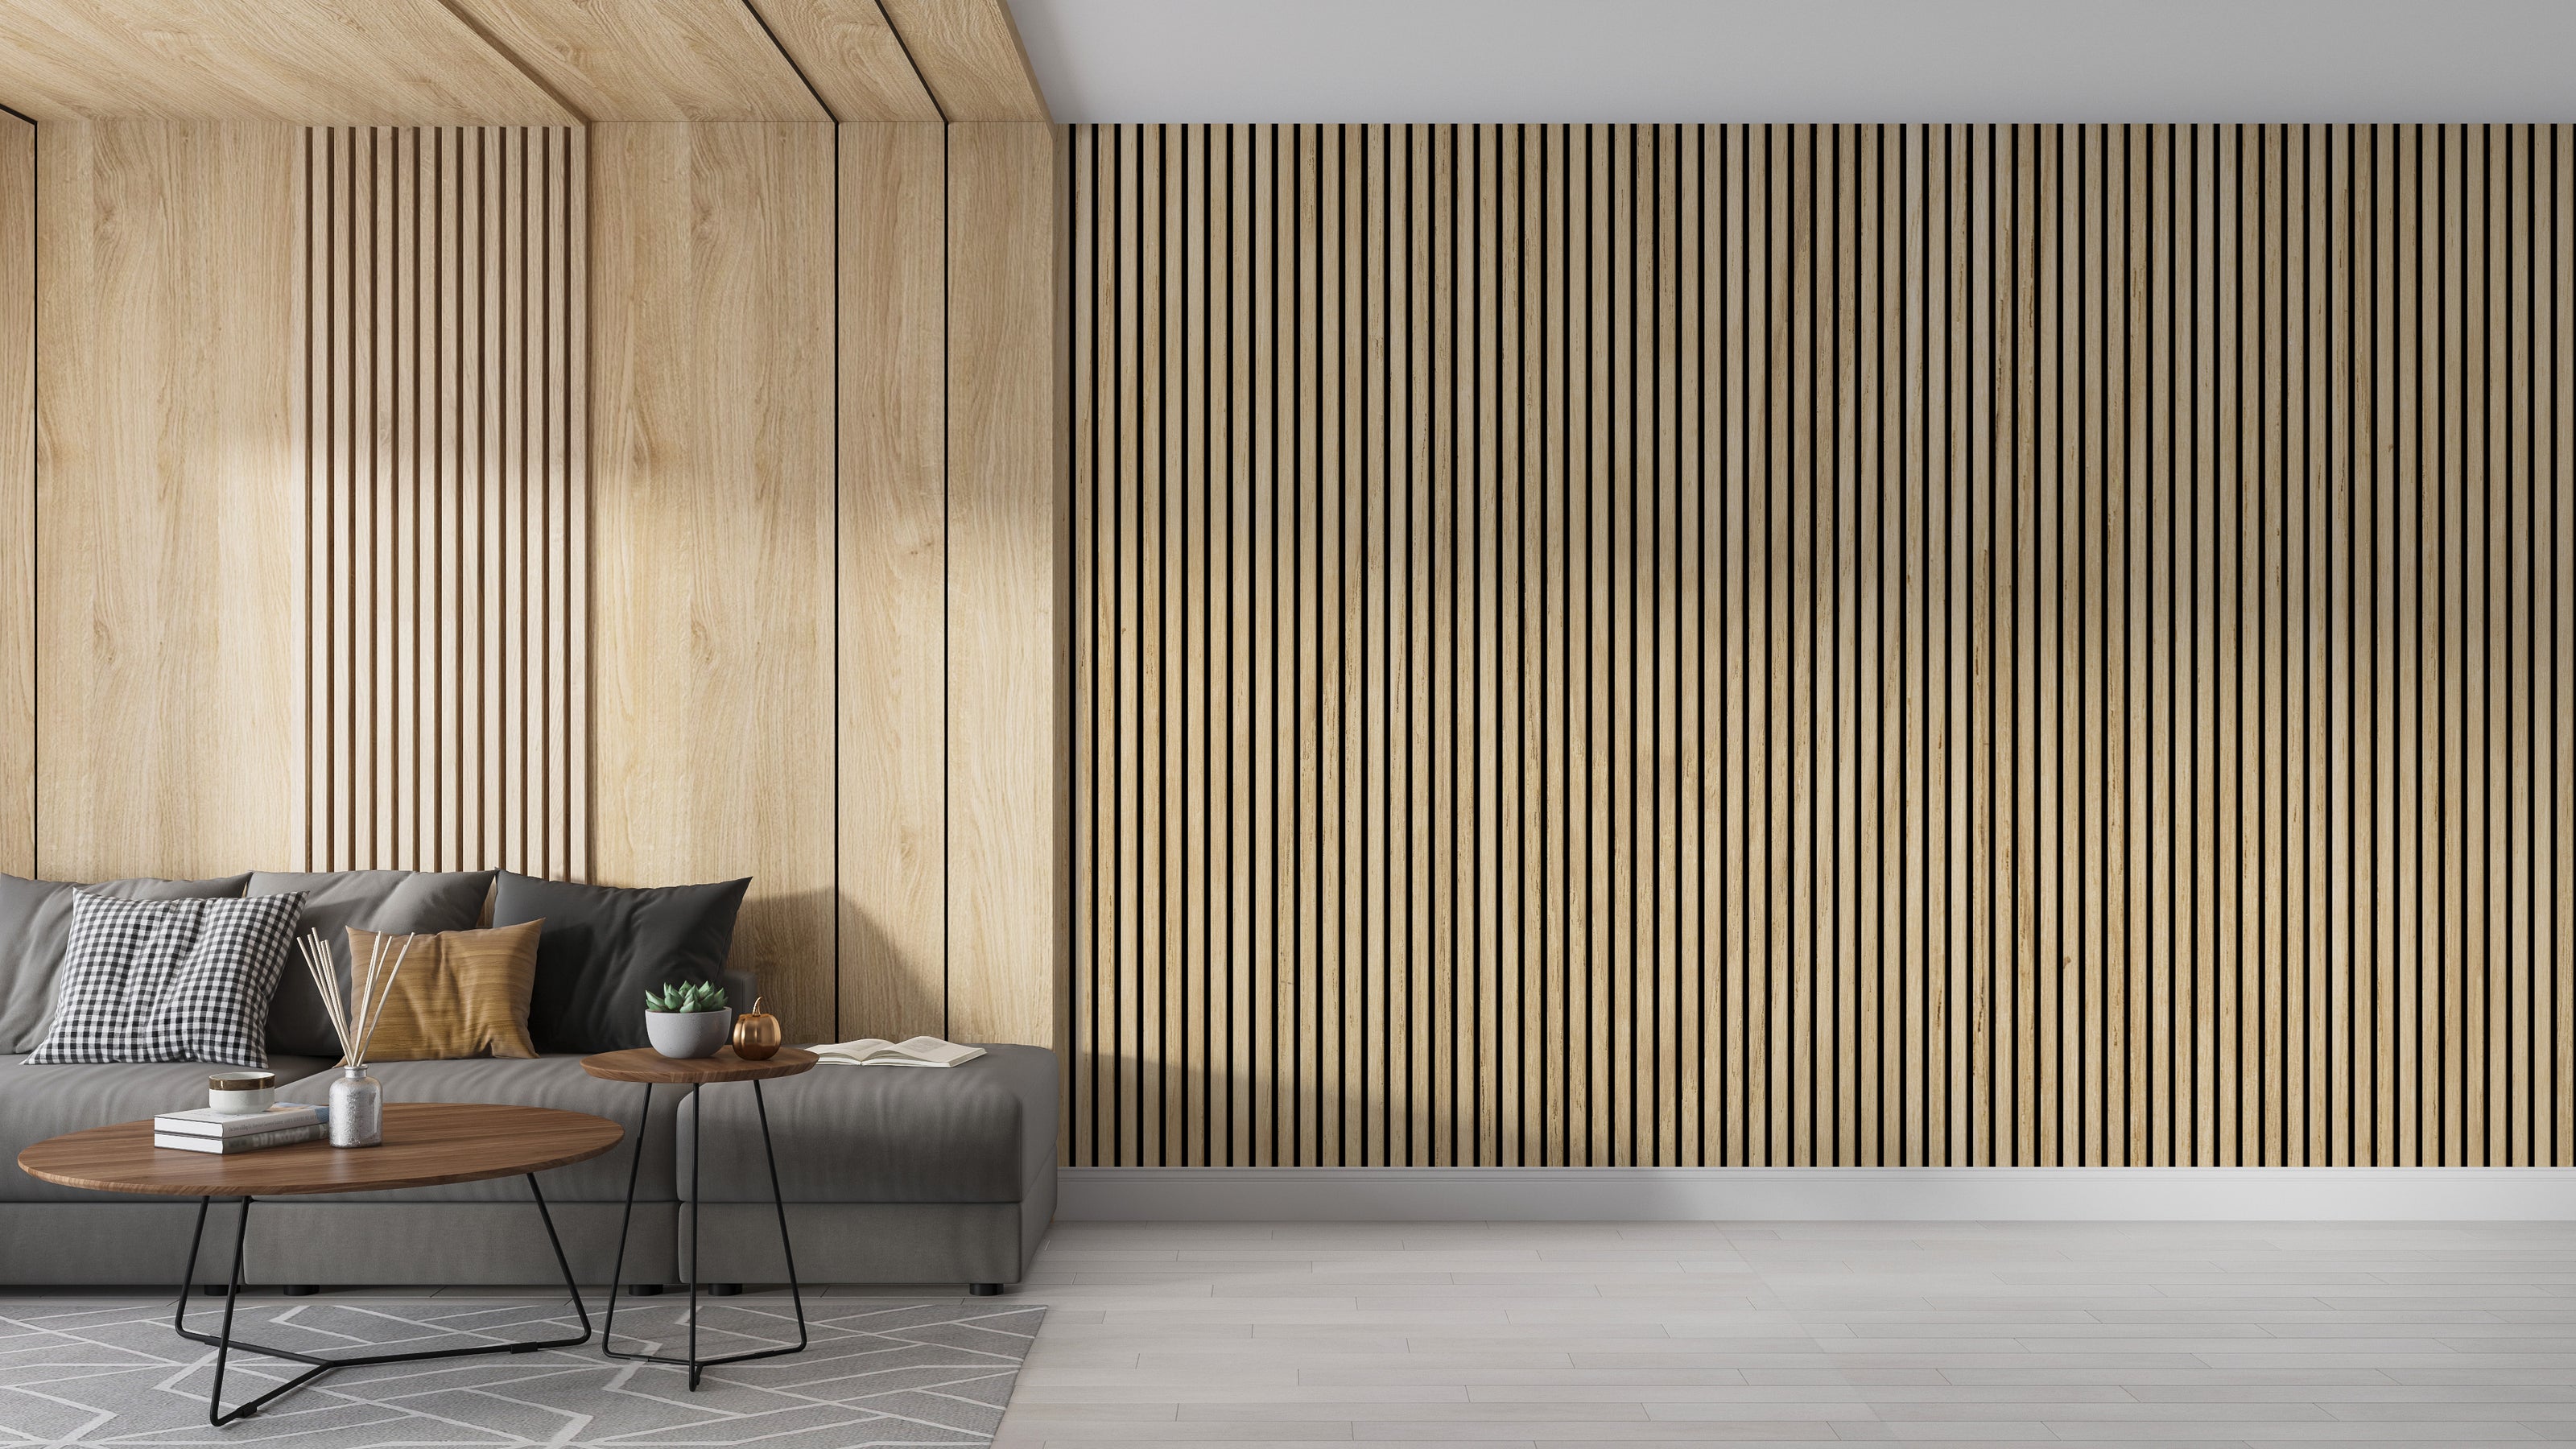 Add a bit of Nature to your Space with Wood Slat Acoustic Wall Panels